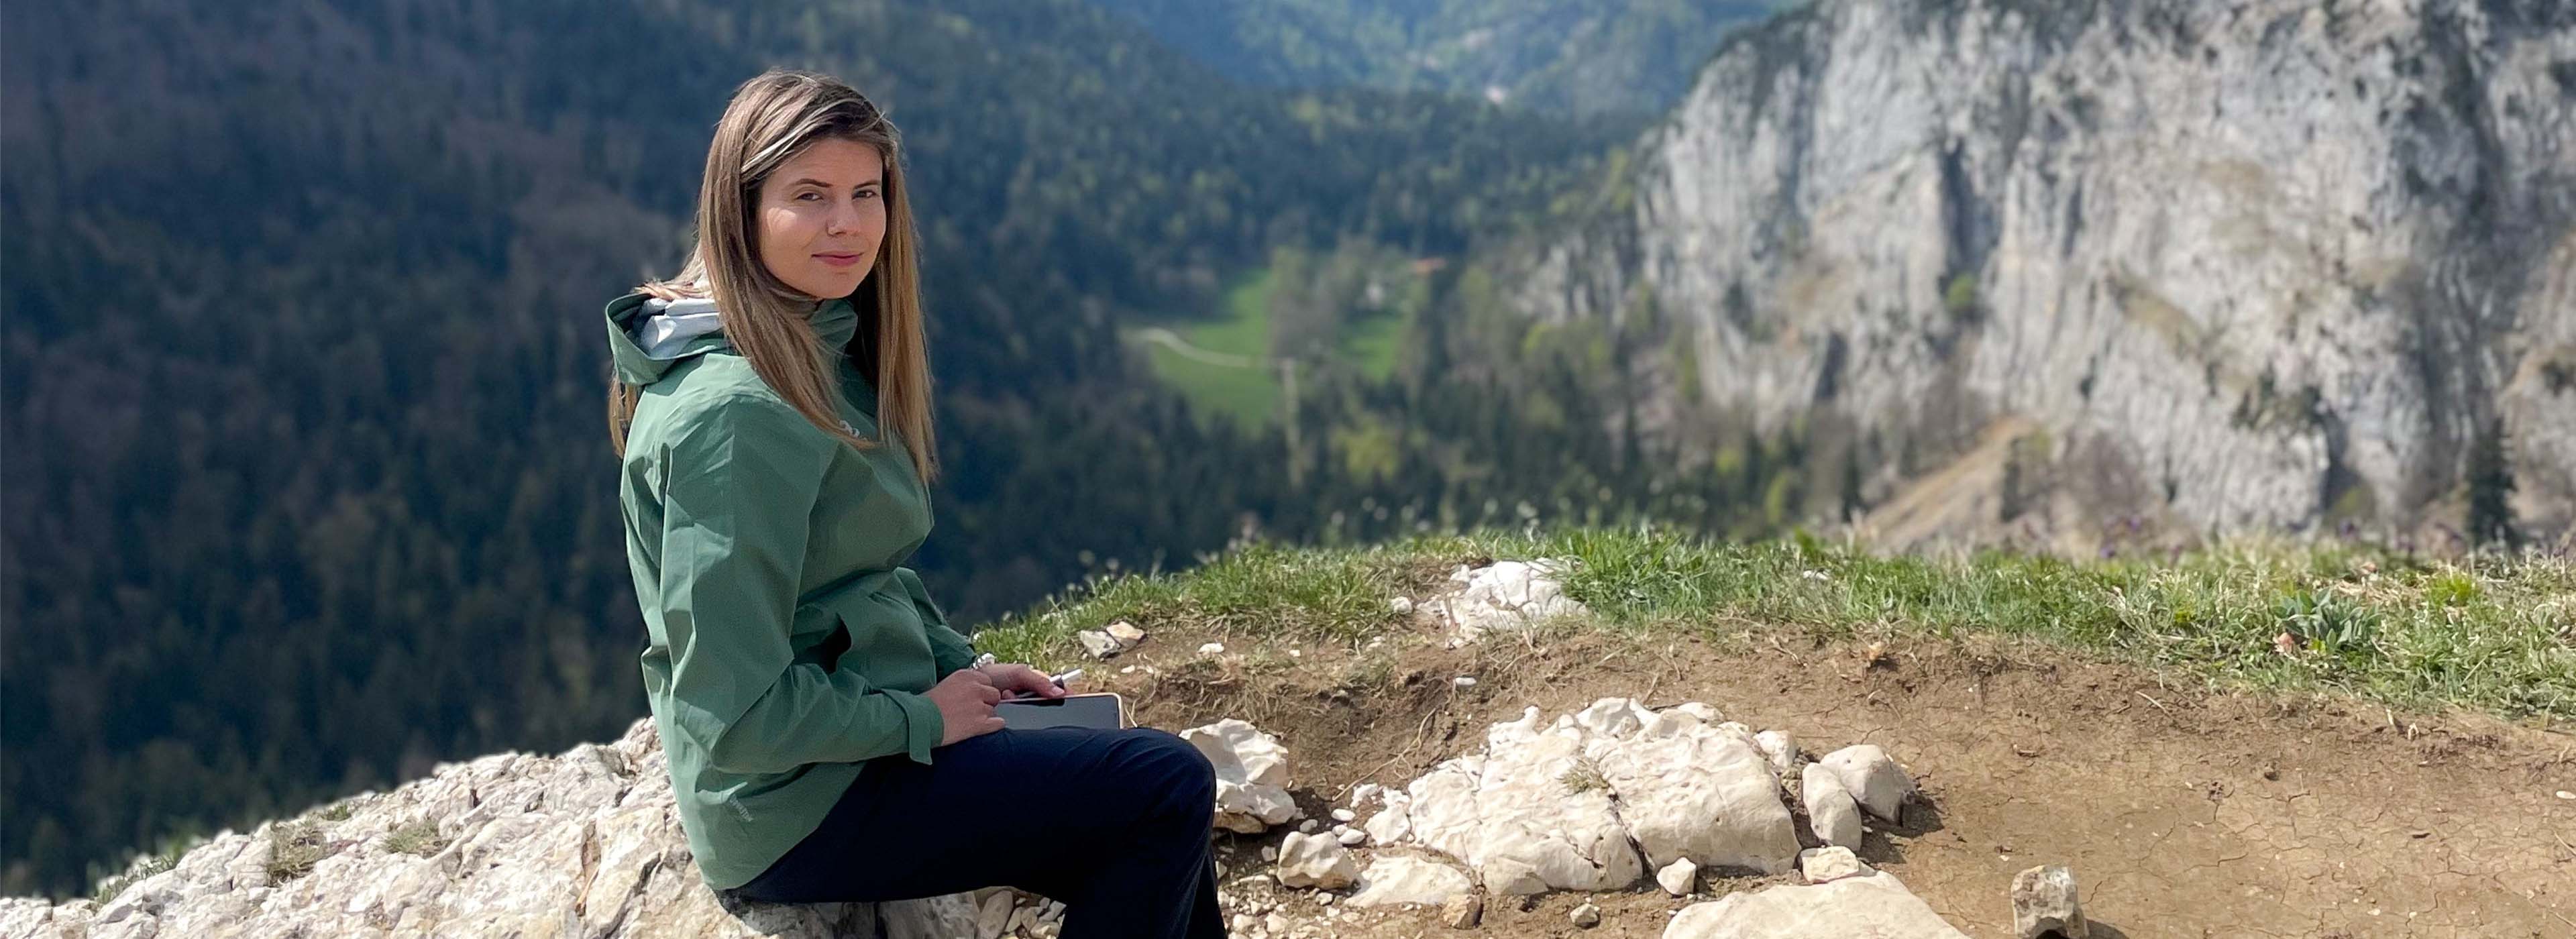 a woman wearing a hiking pant and a merino t-shirt